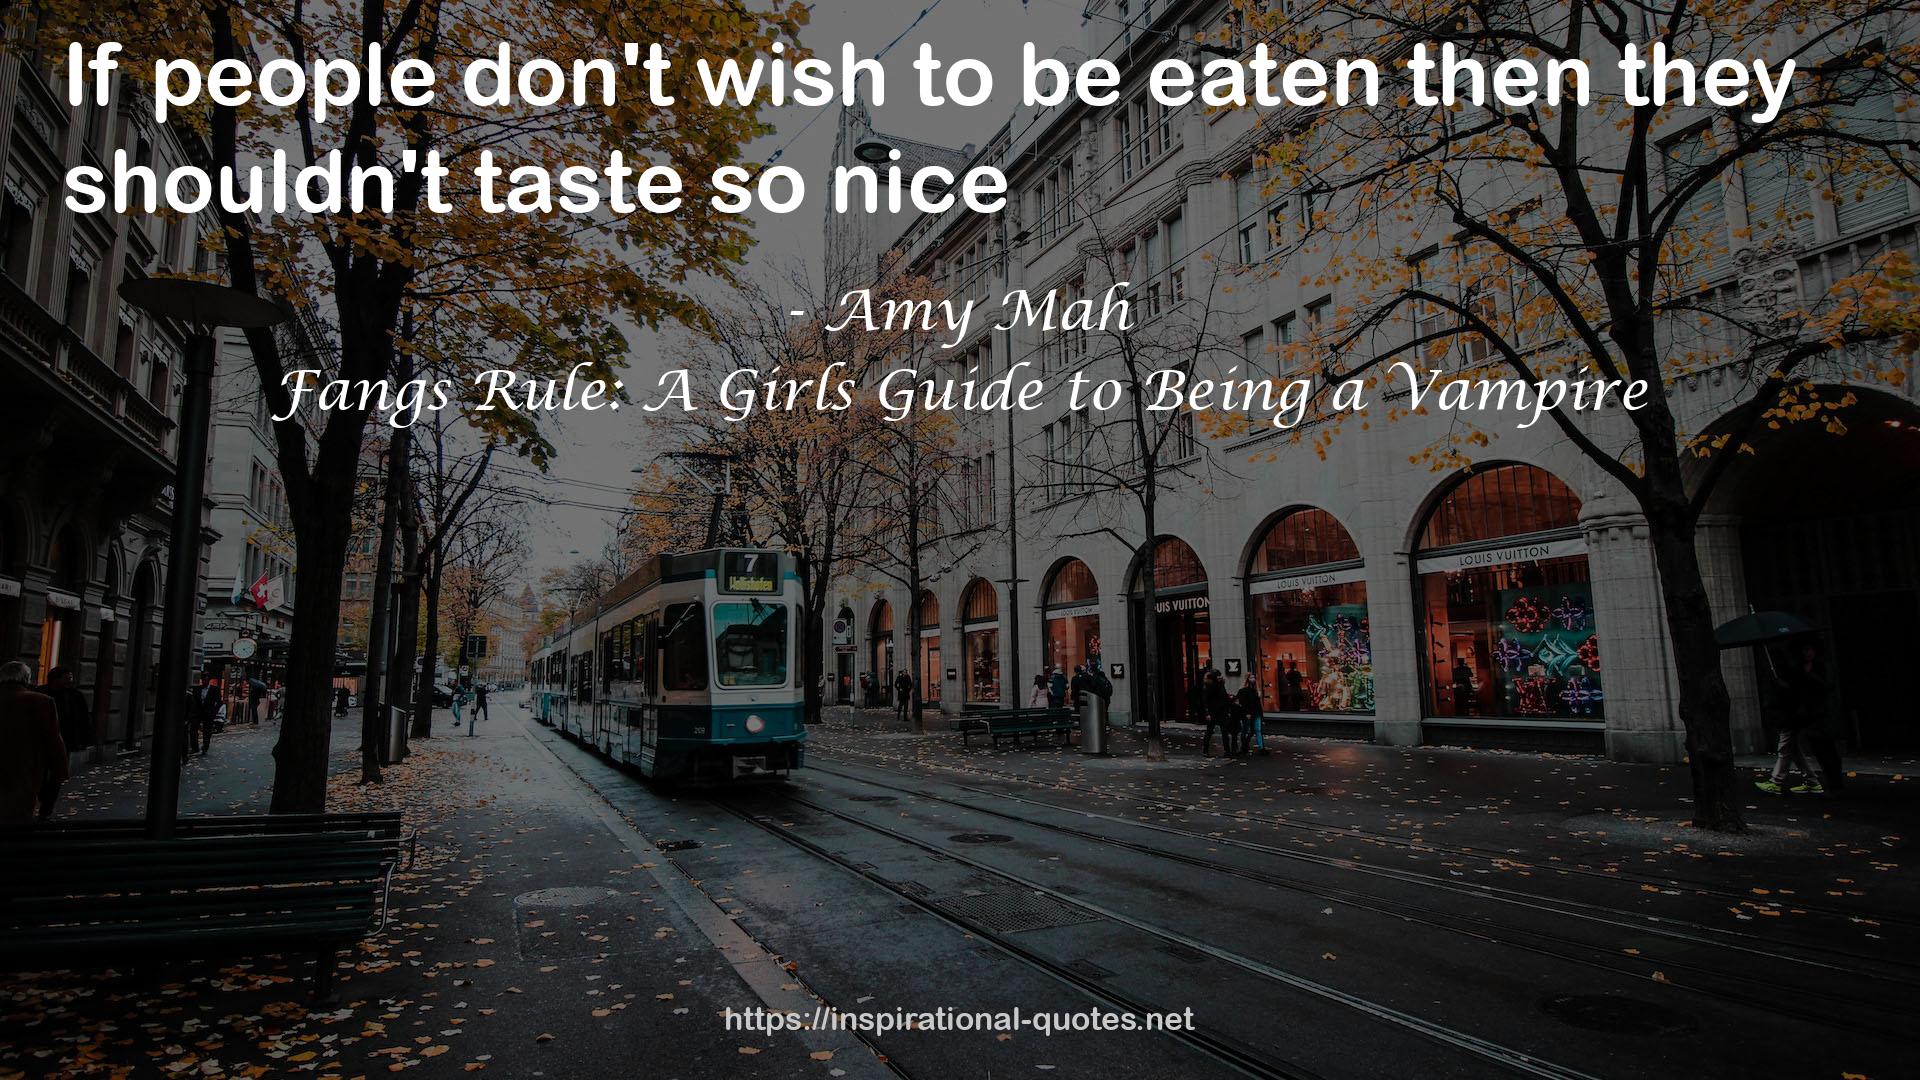 Fangs Rule: A Girls Guide to Being a Vampire QUOTES